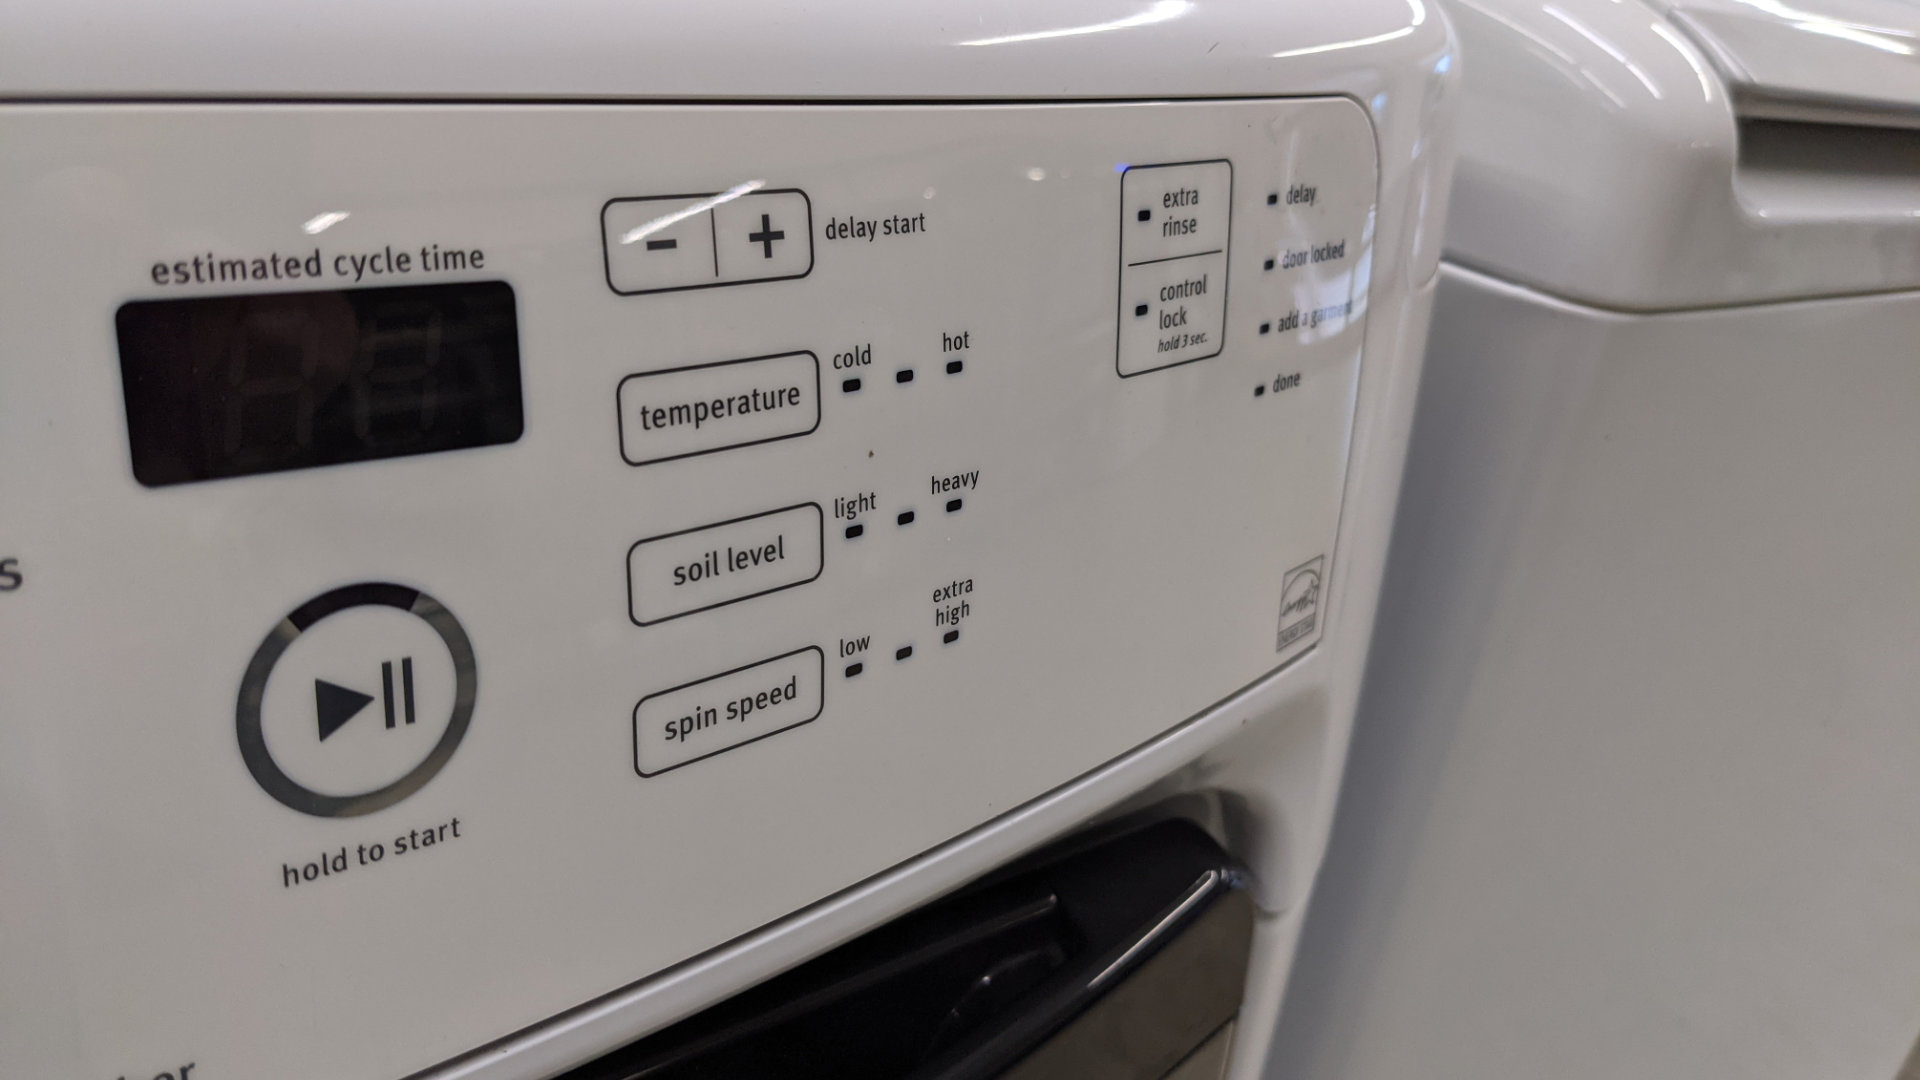 How To Fix The Error Code F09 For Whirlpool Washer